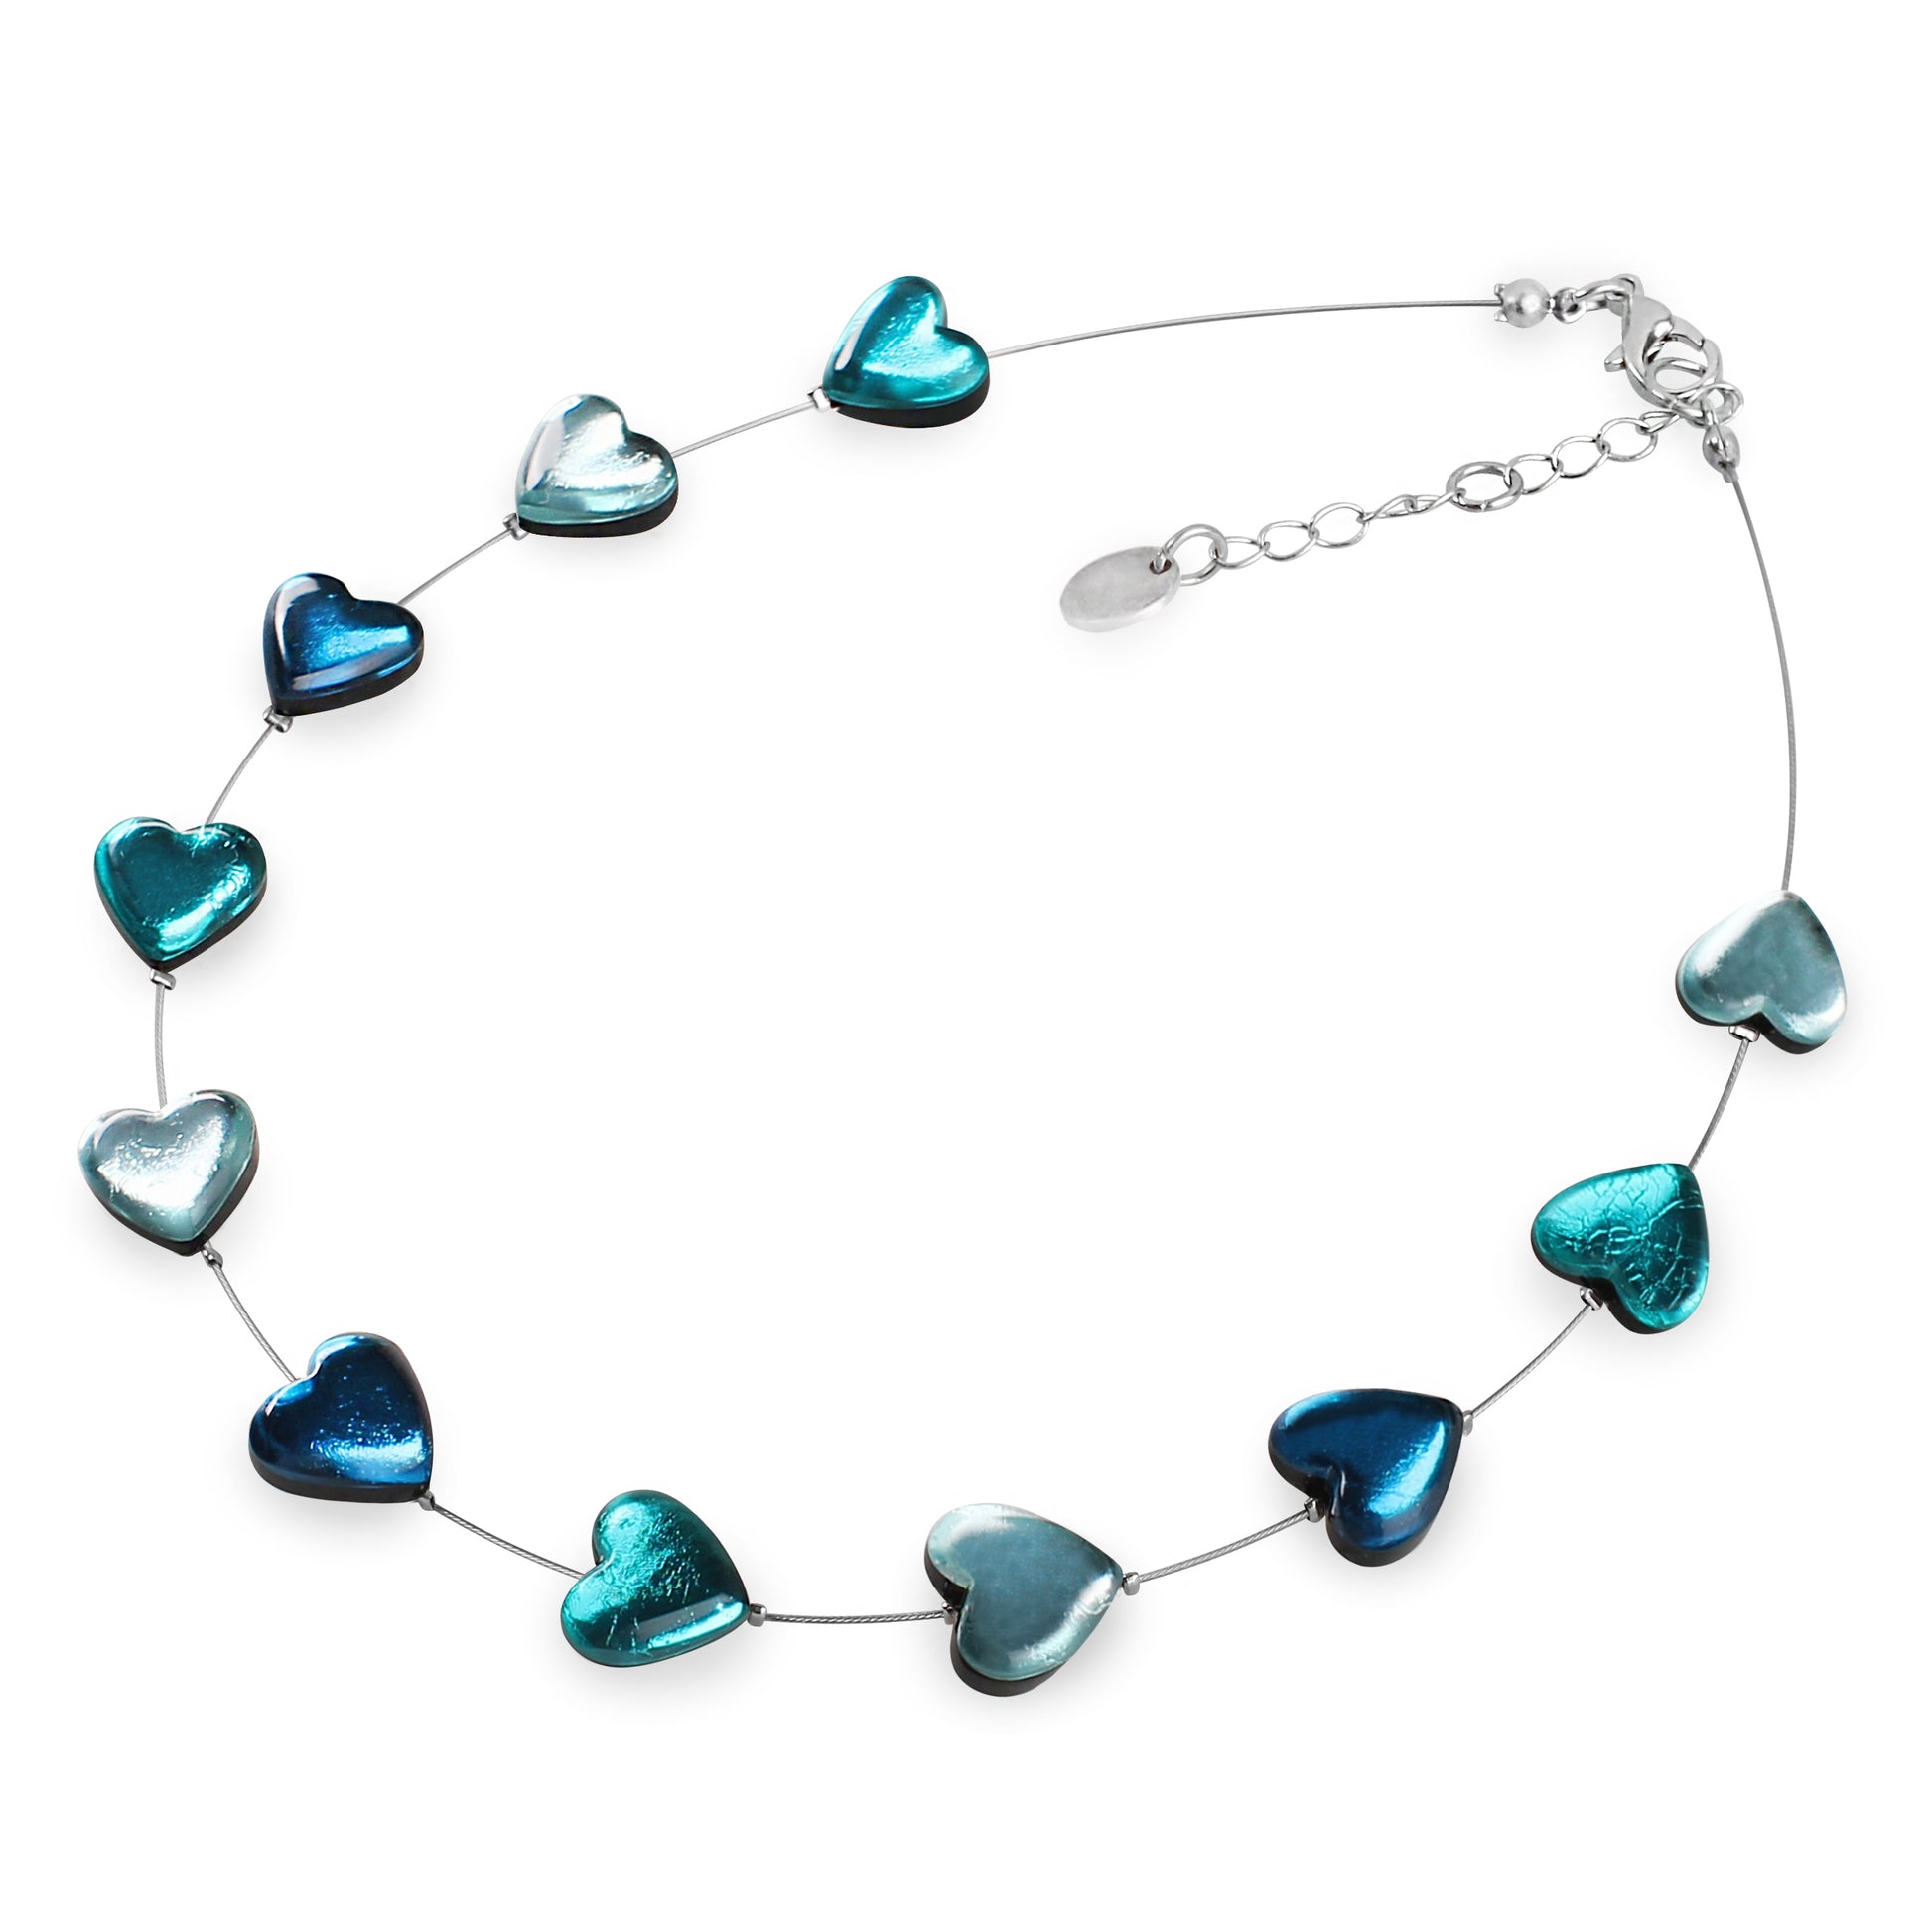 Teal Love Heart Shiny Button Necklace